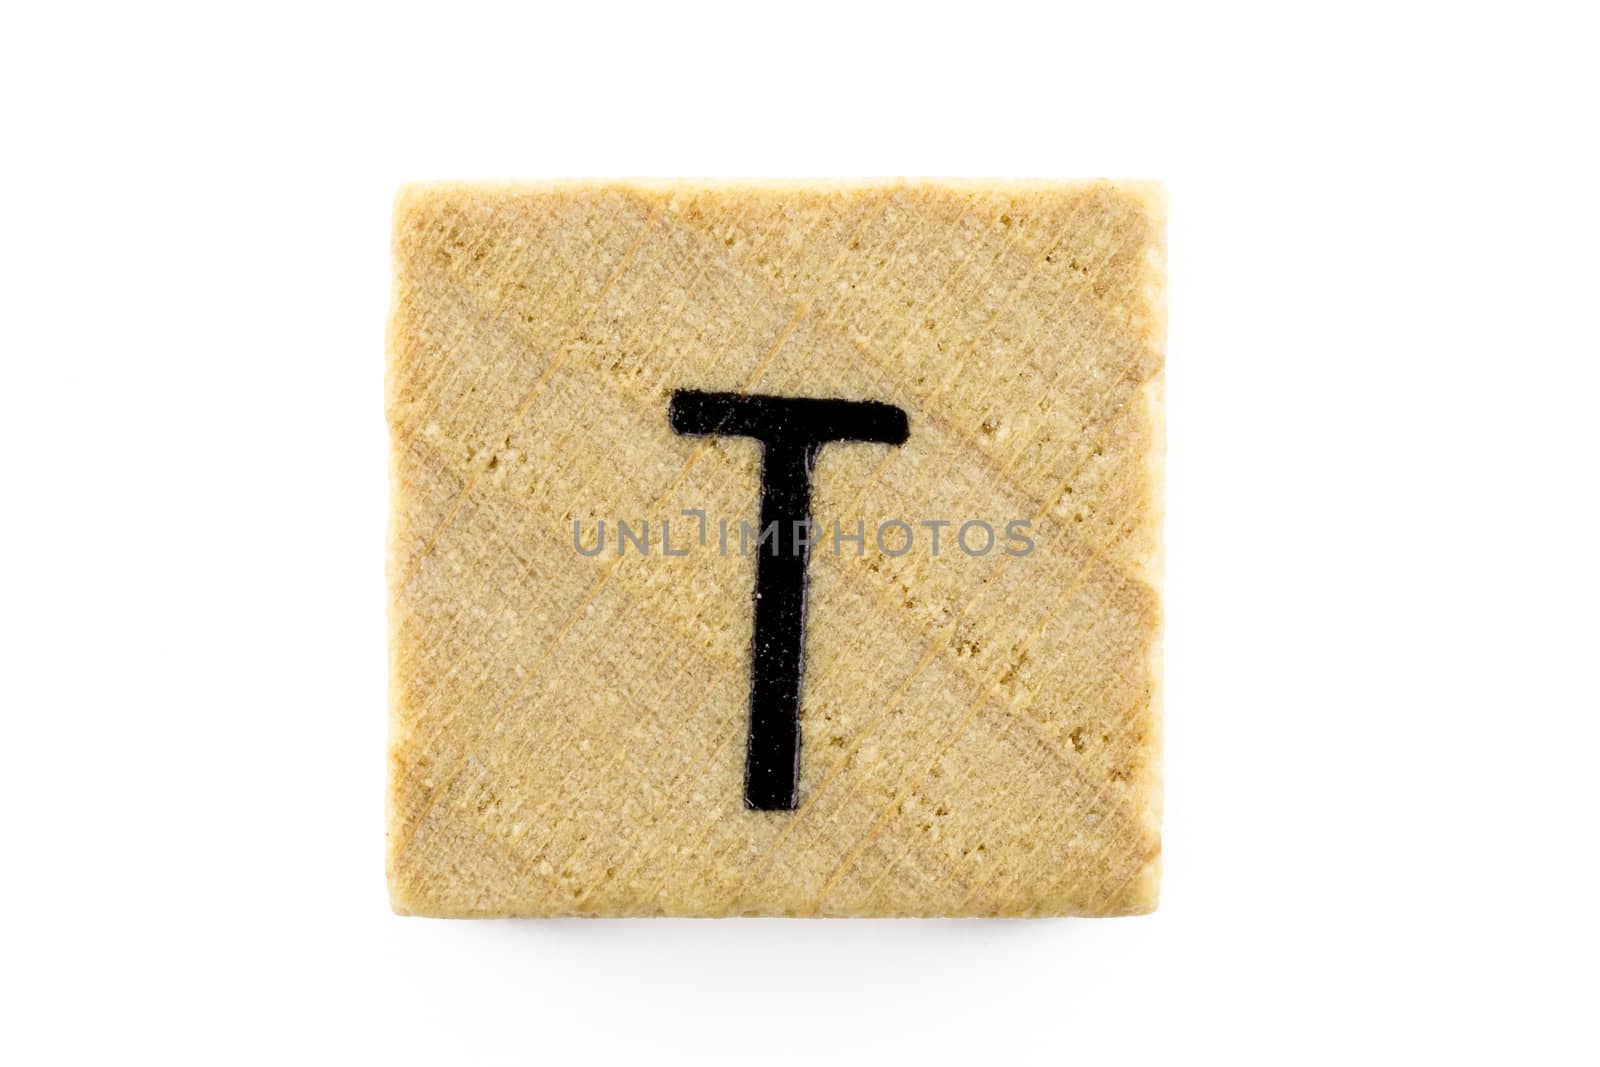 Wooden alphabet blocks with letters T (Isolated)